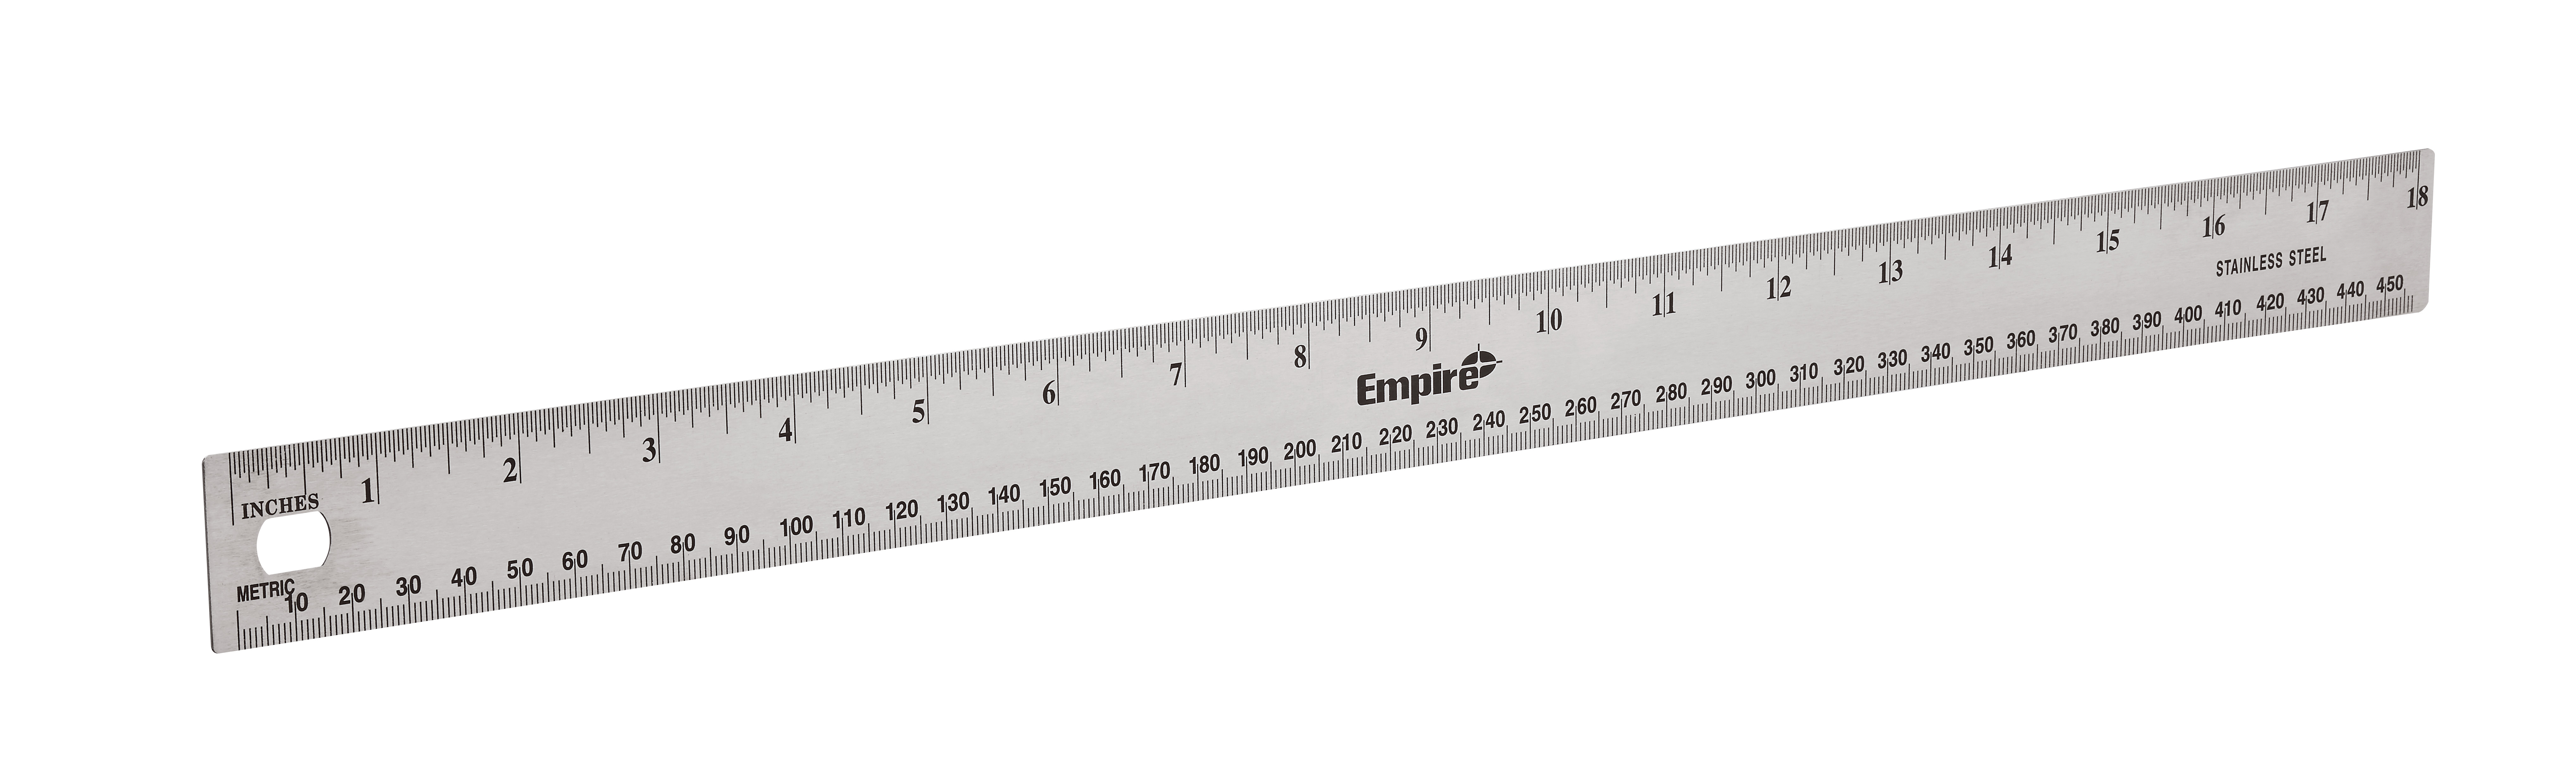 27318 046609273186 The Empire 18 in. Stiff ruler is designed for long-term use. The ruler is crafted with stainless steel for strength and durability and features etched black graduations, allowing measurements to be read more clearly. It also features inch measurements up to 16ths and metric measurements up to millimeters. It has a hanging hole for easy storage.